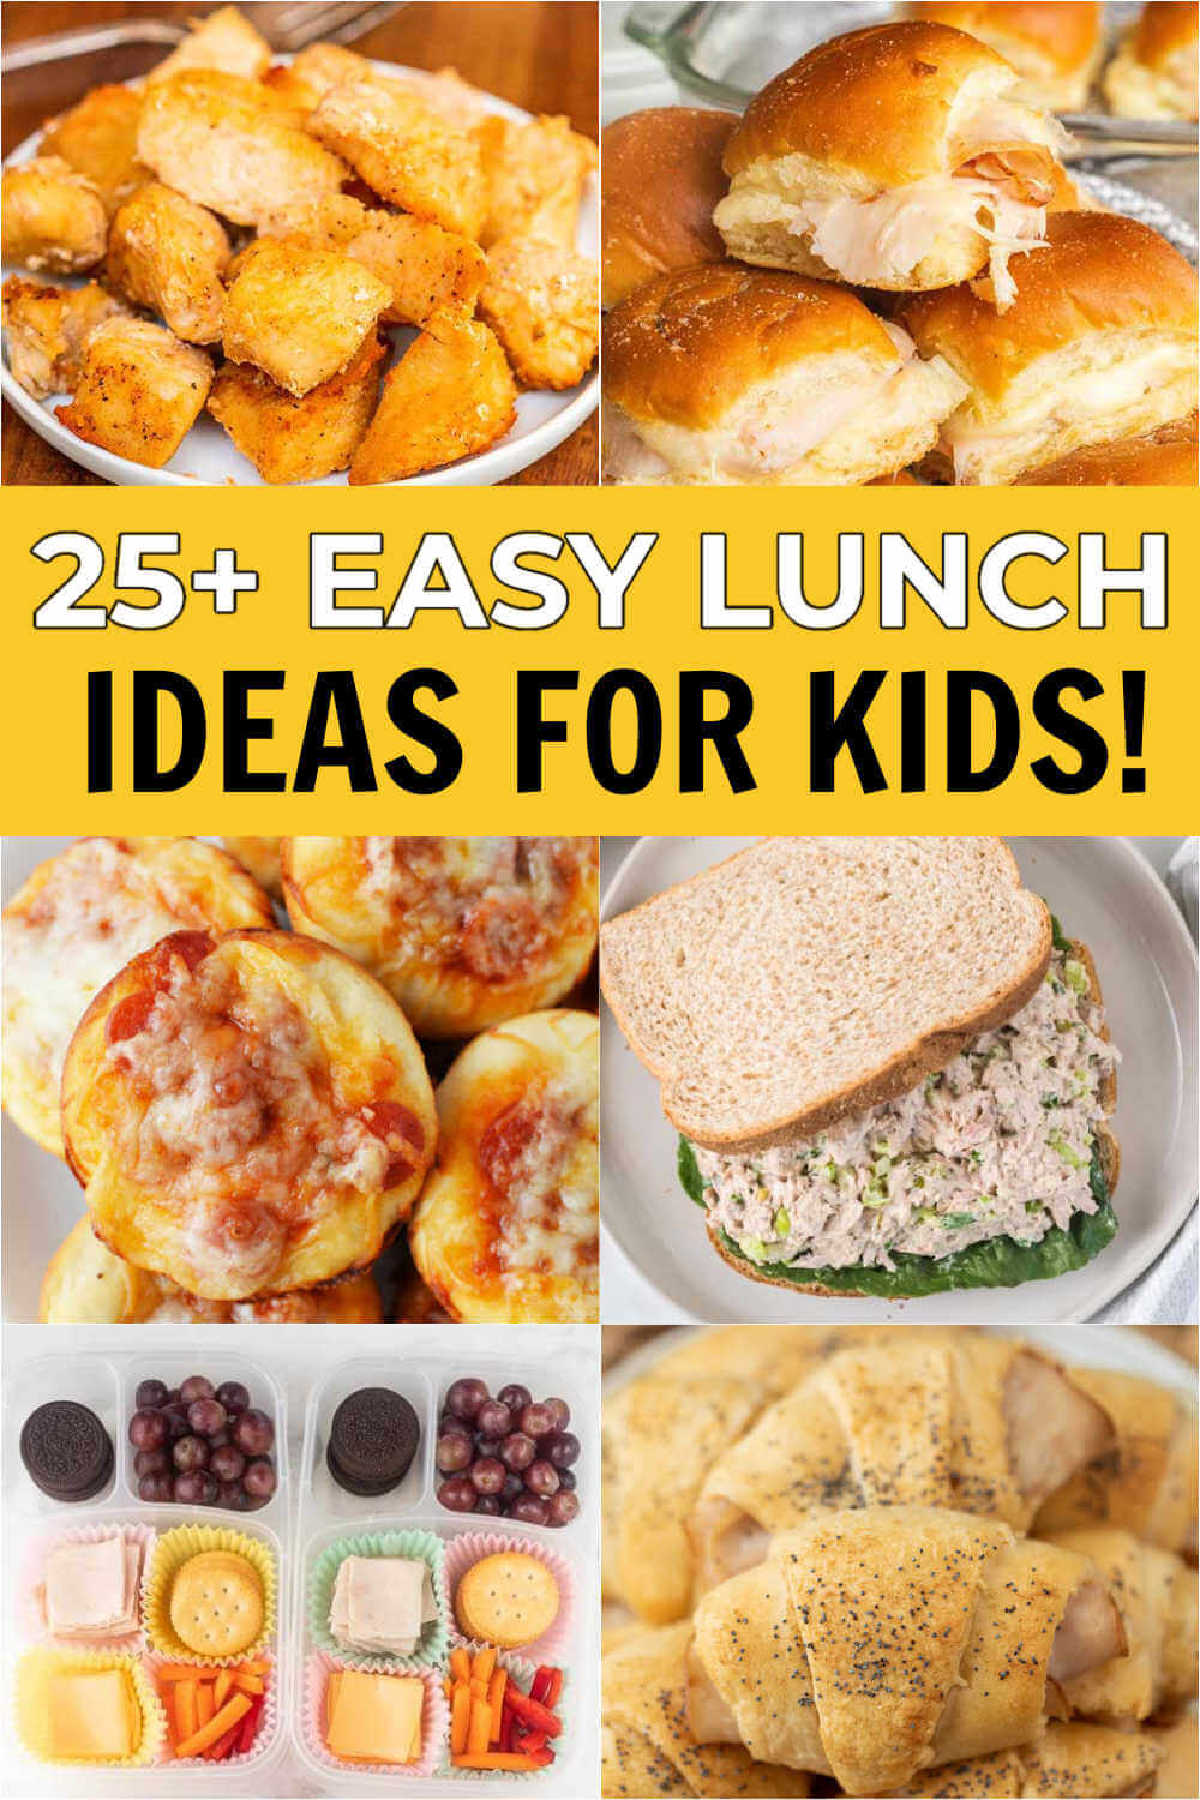 We have Easy lunch ideas for kids that will make lunch time less stressful. All of these easy tasty lunch ideas are frugal, quick and so delicious. Everyone will love these easy lunch ideas for kids!  #eatingonadime #lunchrecipes #lunchideas #kidlunches 
